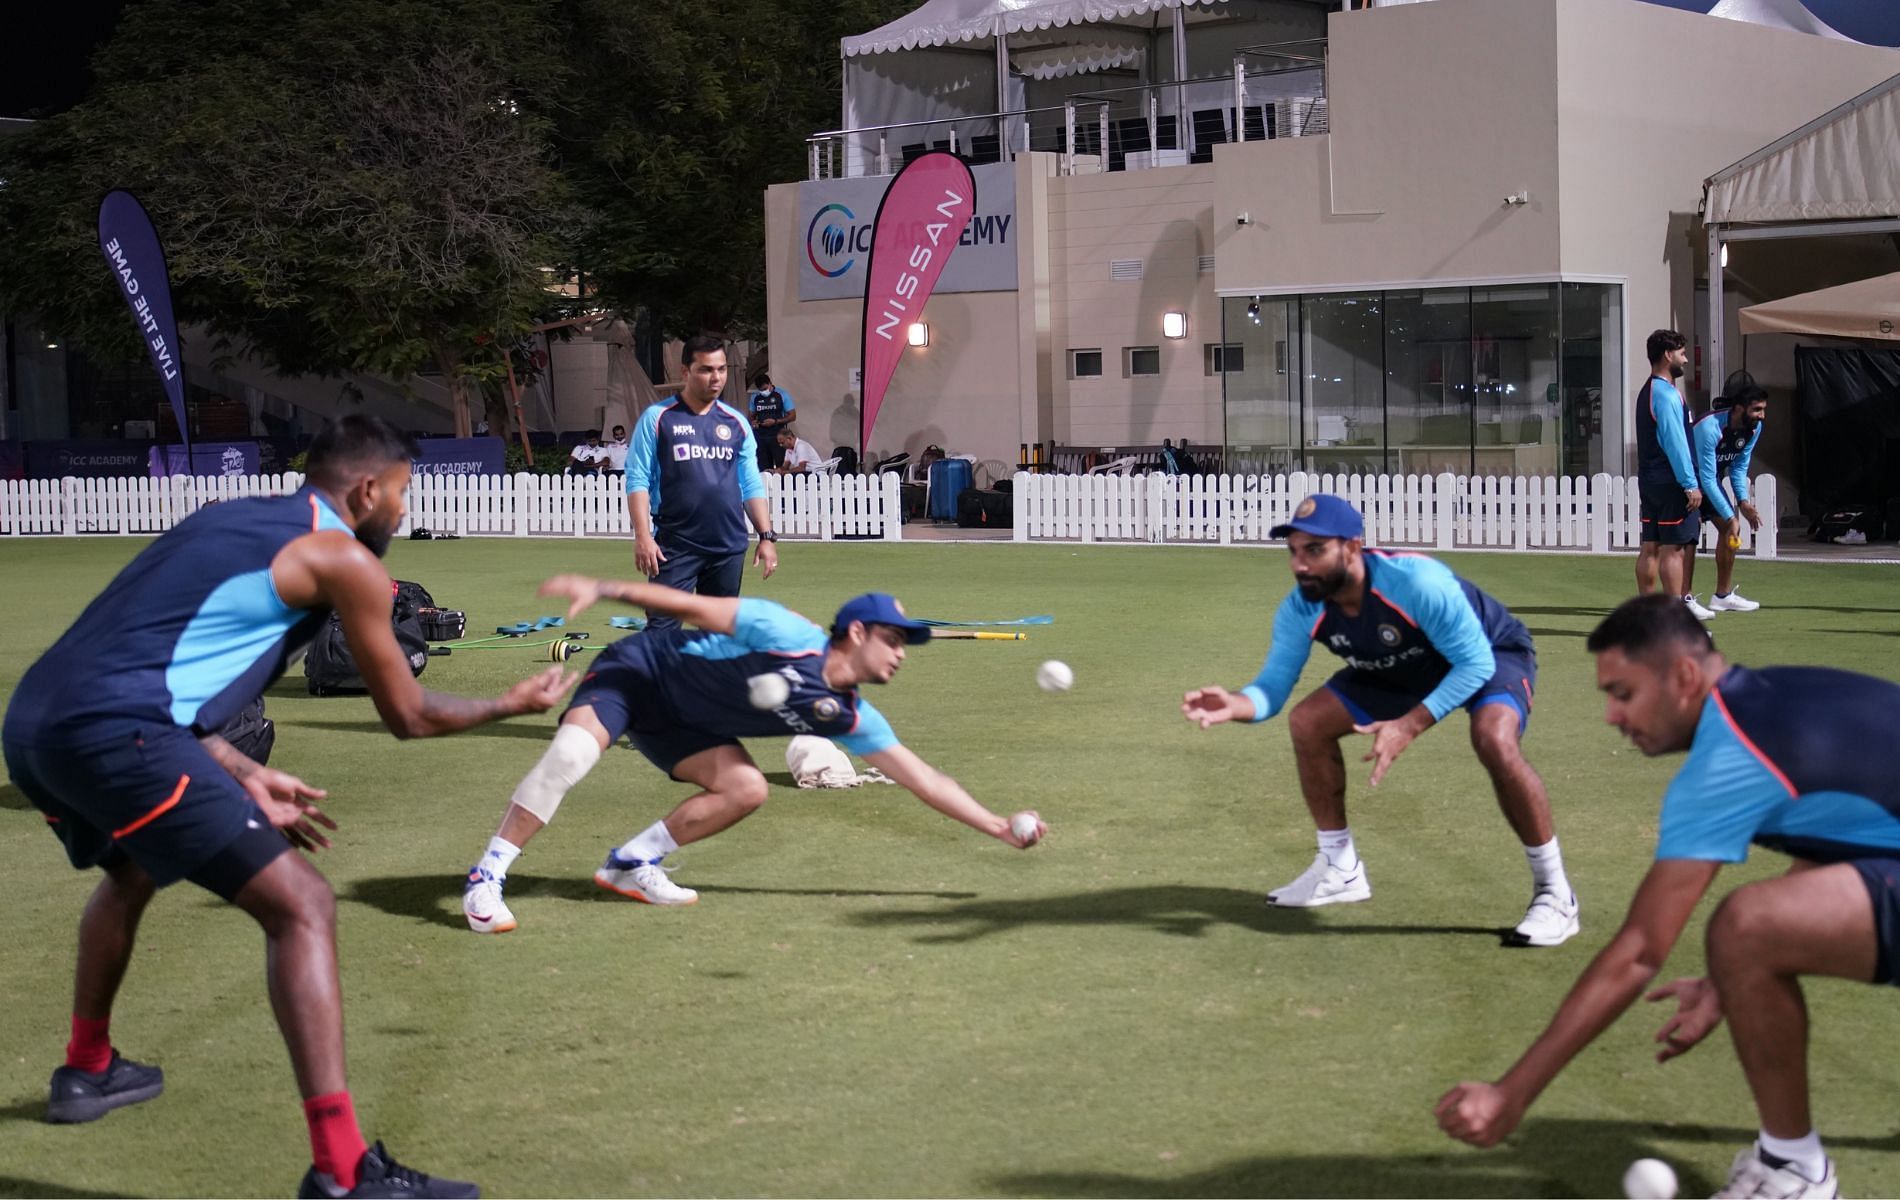 The Indian team had a fielding drill during their training on Wednesday.